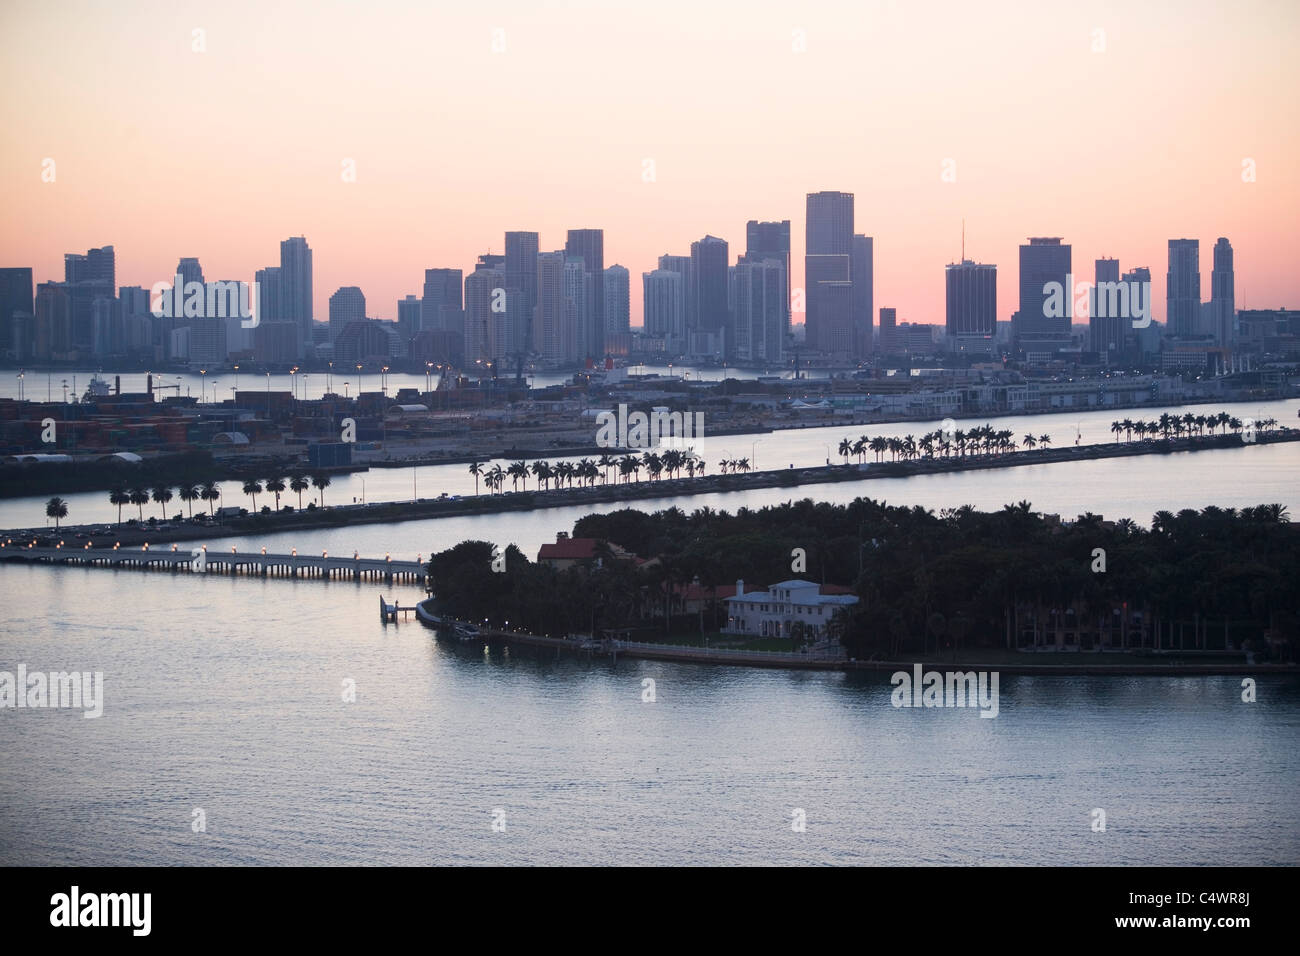 USA, Florida, Miami, Cityscape with littoral Banque D'Images